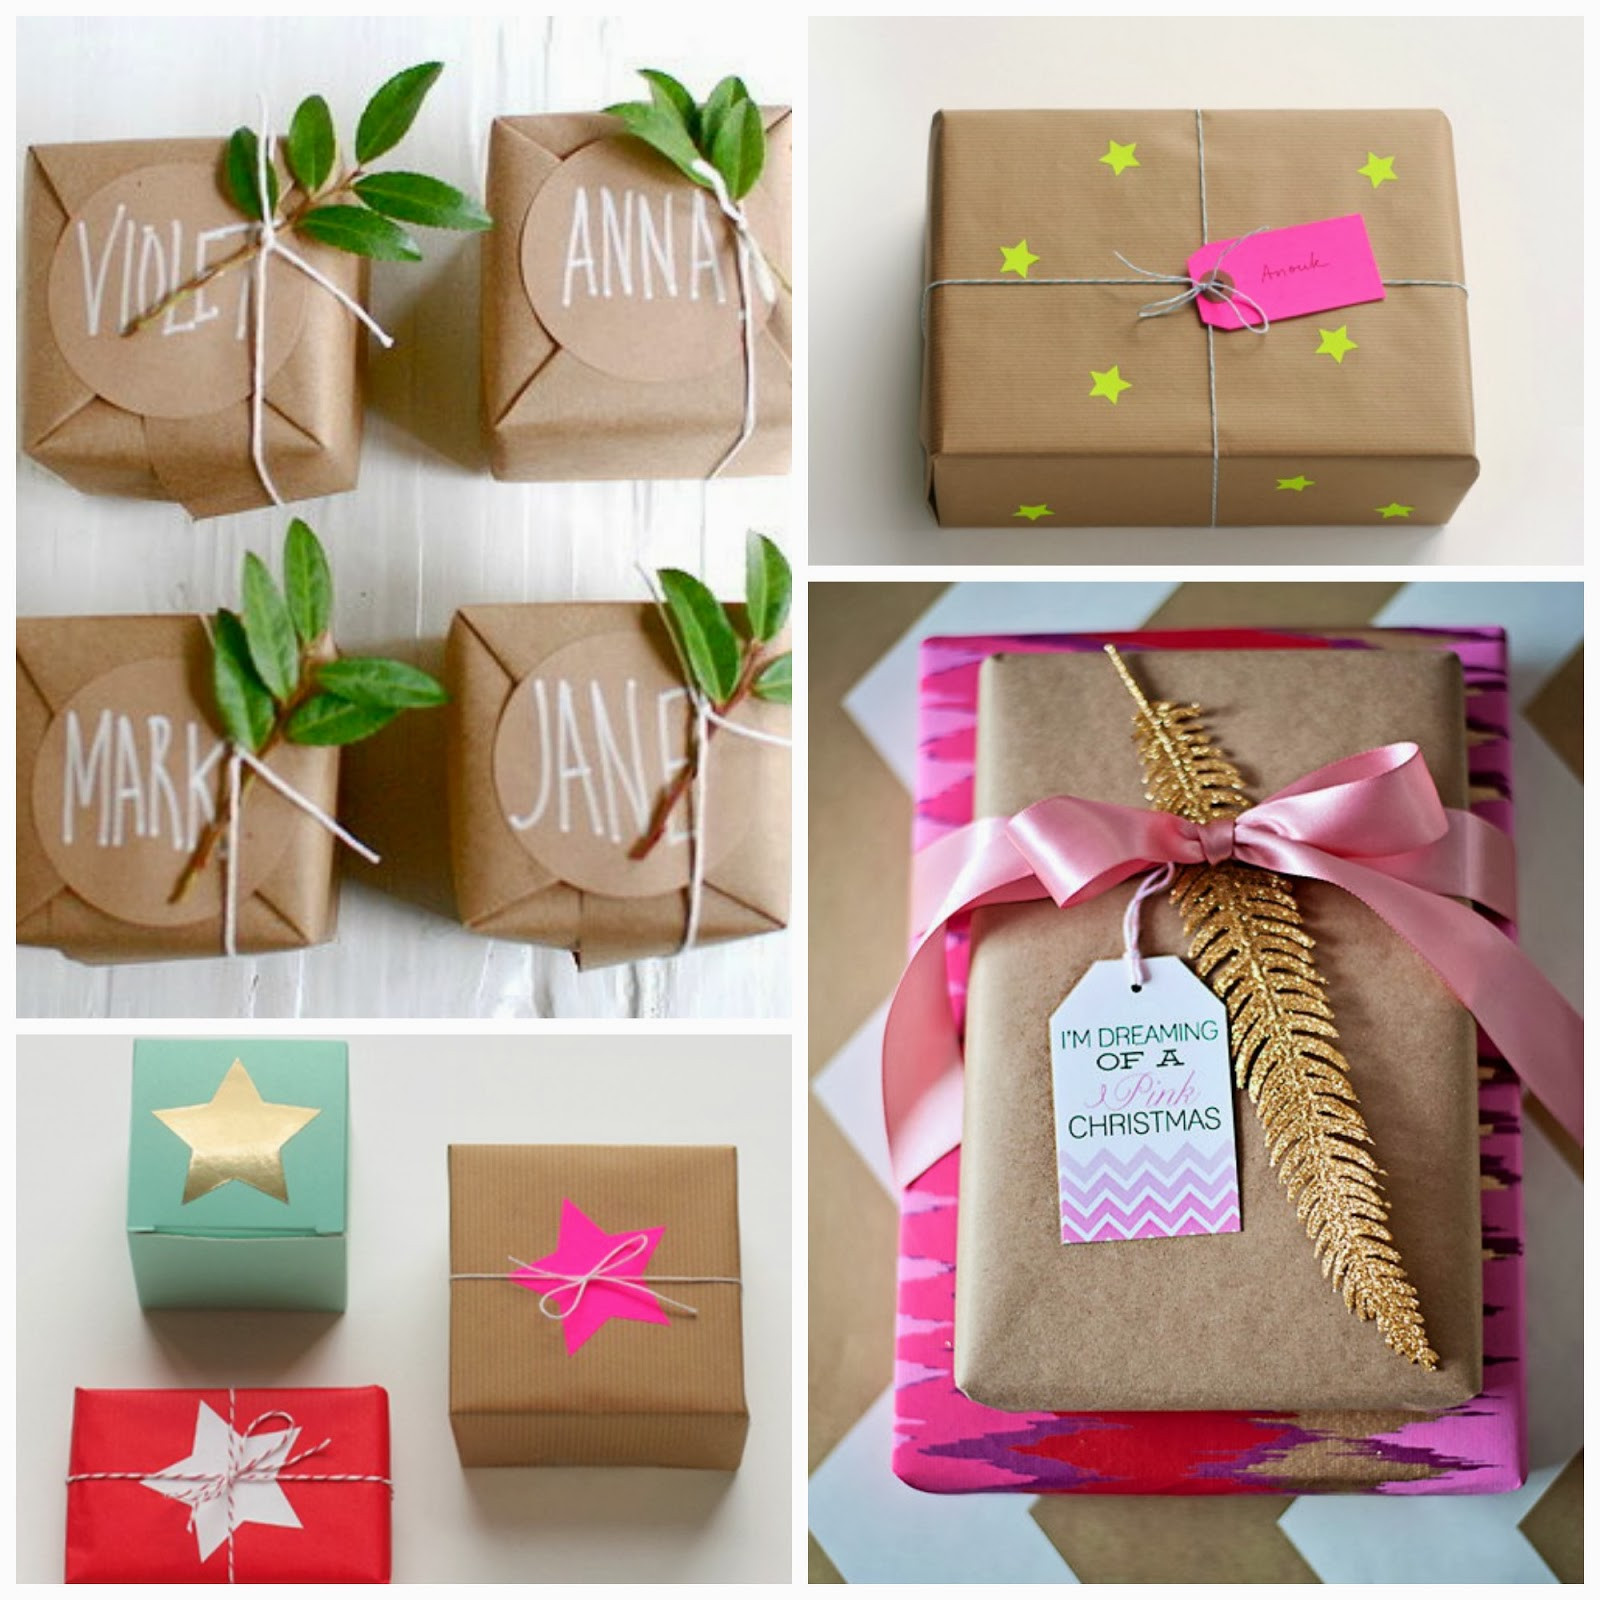 Pinterest Holiday Gift Ideas
 honey and fizz Christmas Gift Wrapping Ideas